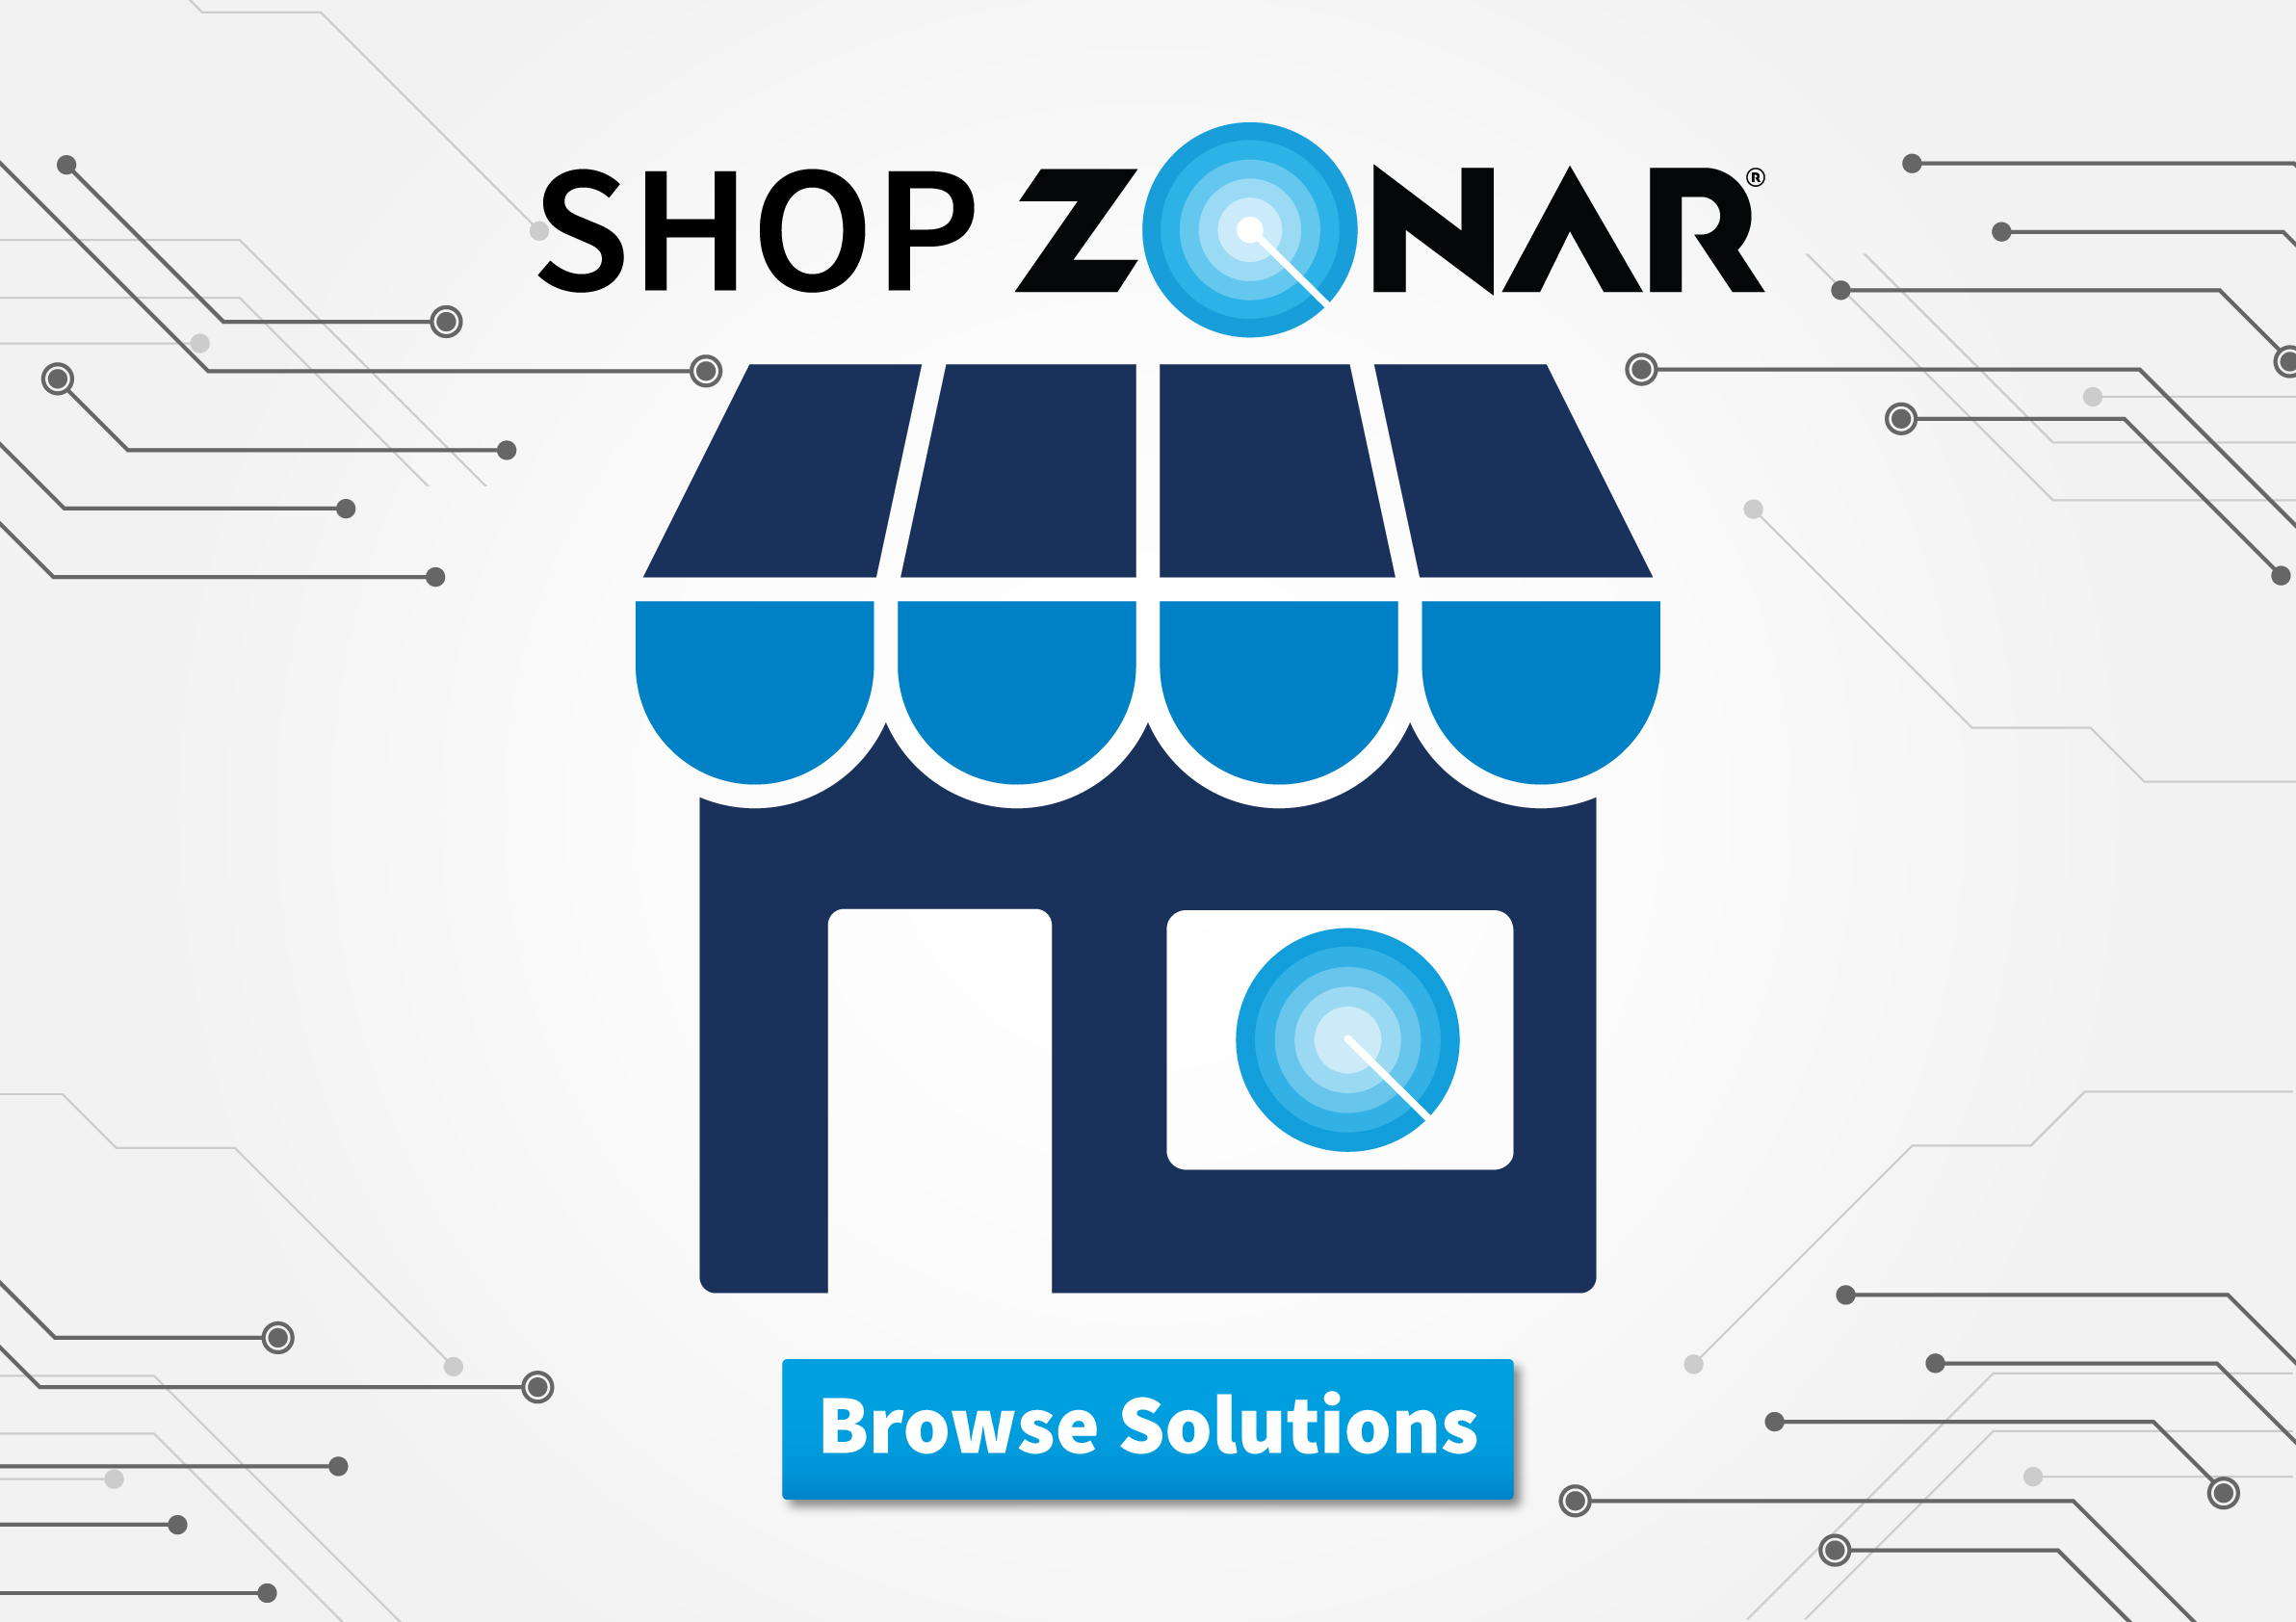 Shop for solutions from Zonar.